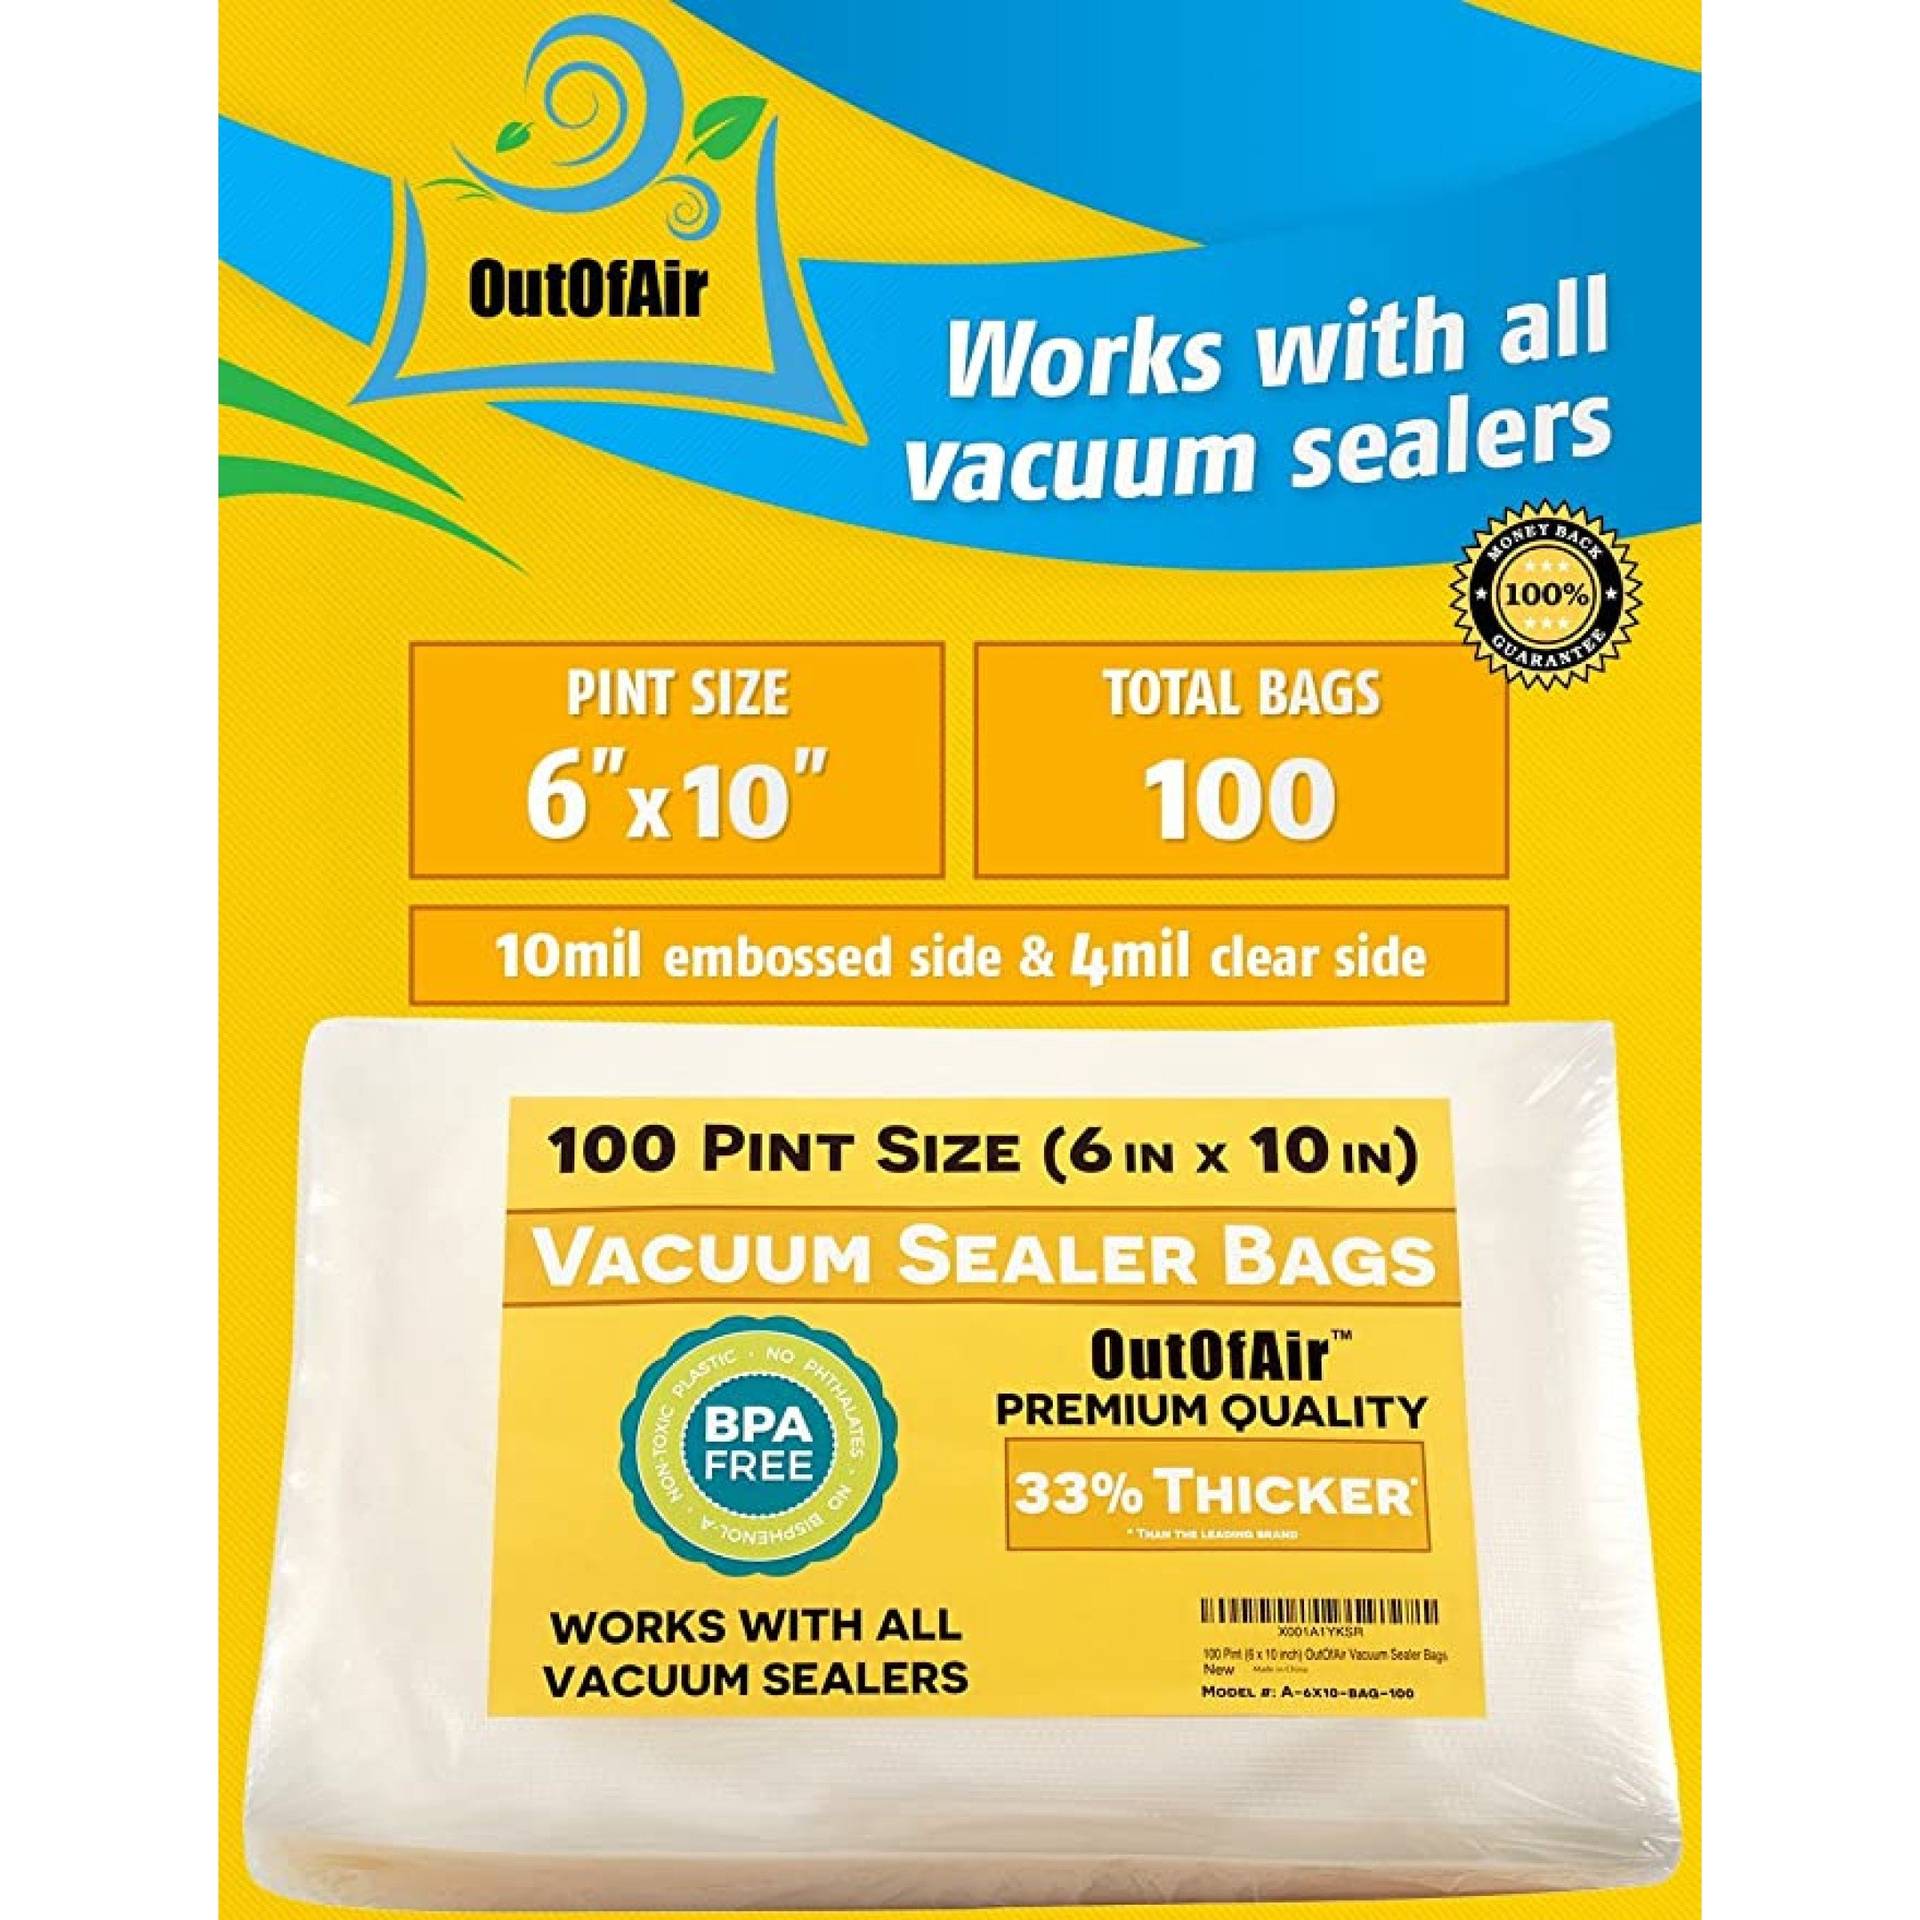 100 Vacuum Sealer Bags: Pint Size (6 x 10) for Foodsaver 33% Thicker, BPA Free